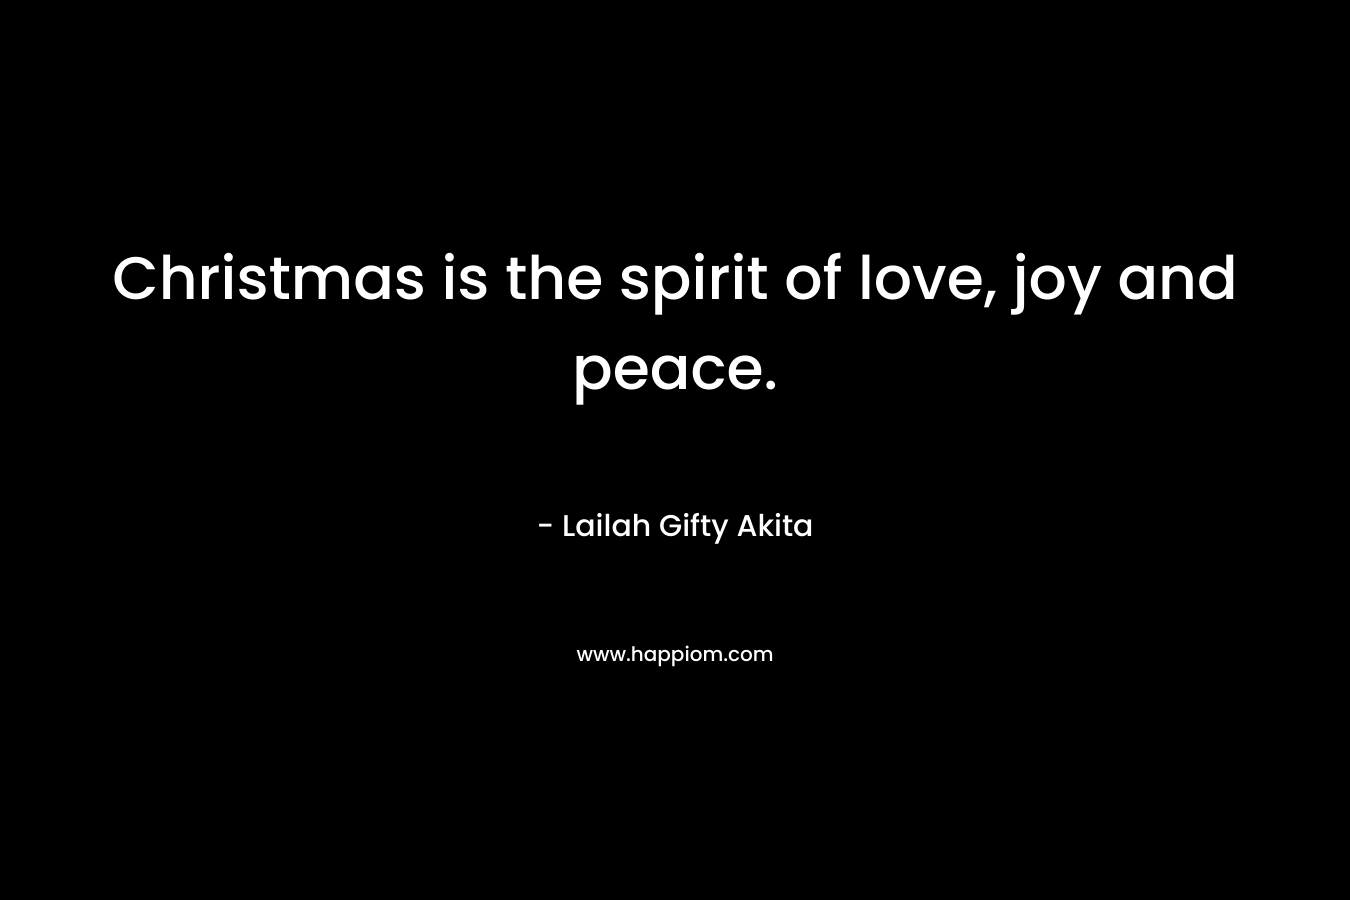 Christmas is the spirit of love, joy and peace.